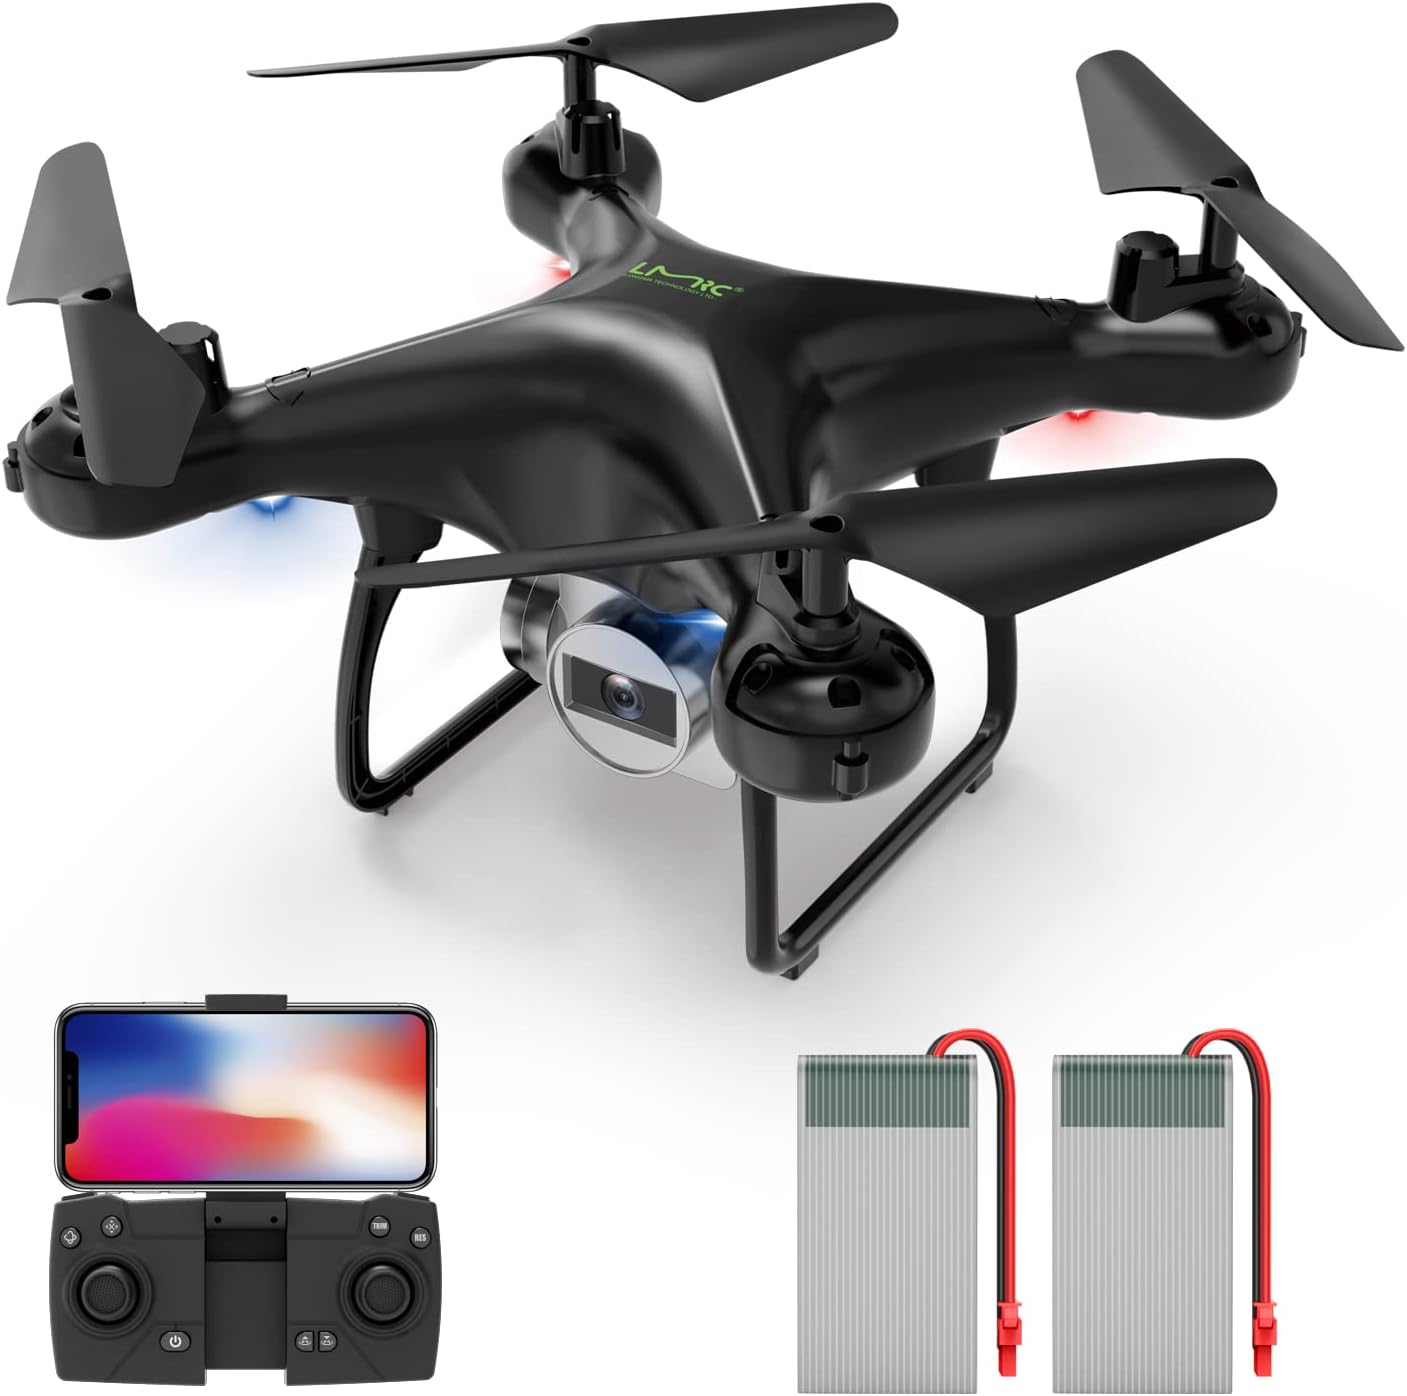 LMRC-LM04 FPV drone with 1080P HD camera for adults and children, 2 modular batteries, RC quadcopter drone, optical flow, altitude hold, headless mode, one-touch takeoff/landing, WiFi live video